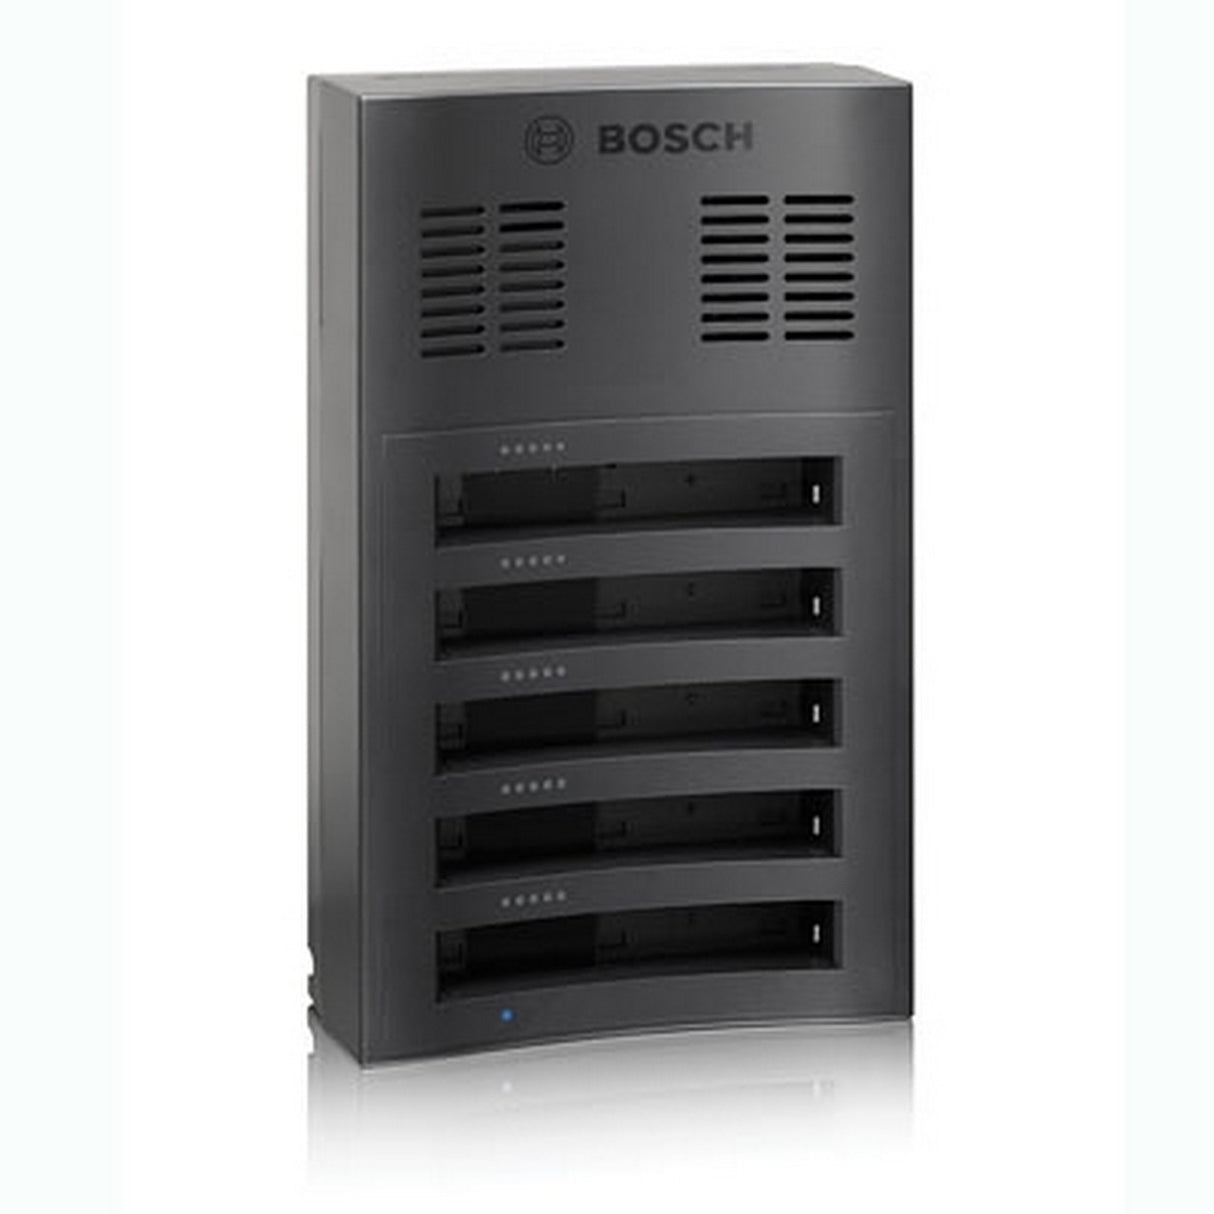 Bosch DCNM-WCH05 | Charger for 5 Battery Packs